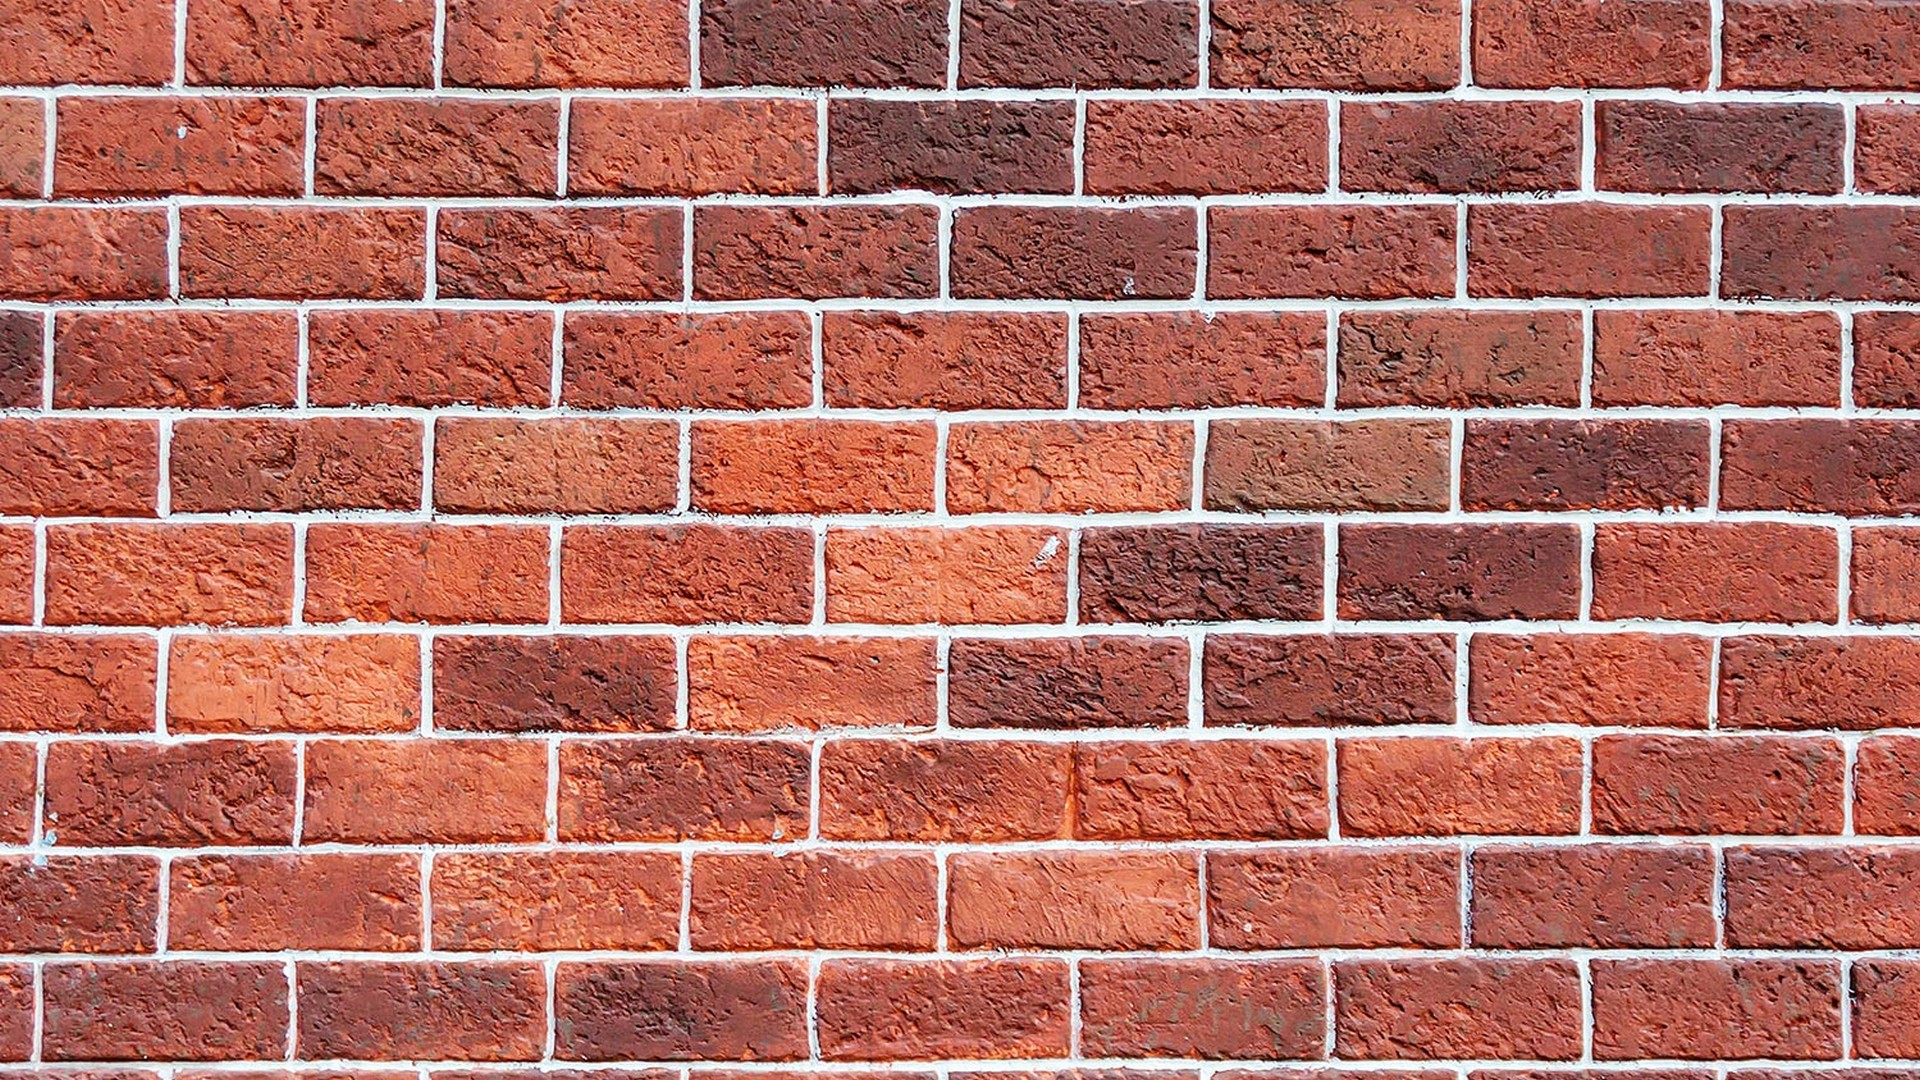 Wallpaper Brick HD With high-resolution 1920X1080 pixel. You can use this wallpaper for your Desktop Computer Backgrounds, Mac Wallpapers, Android Lock screen or iPhone Screensavers and another smartphone device